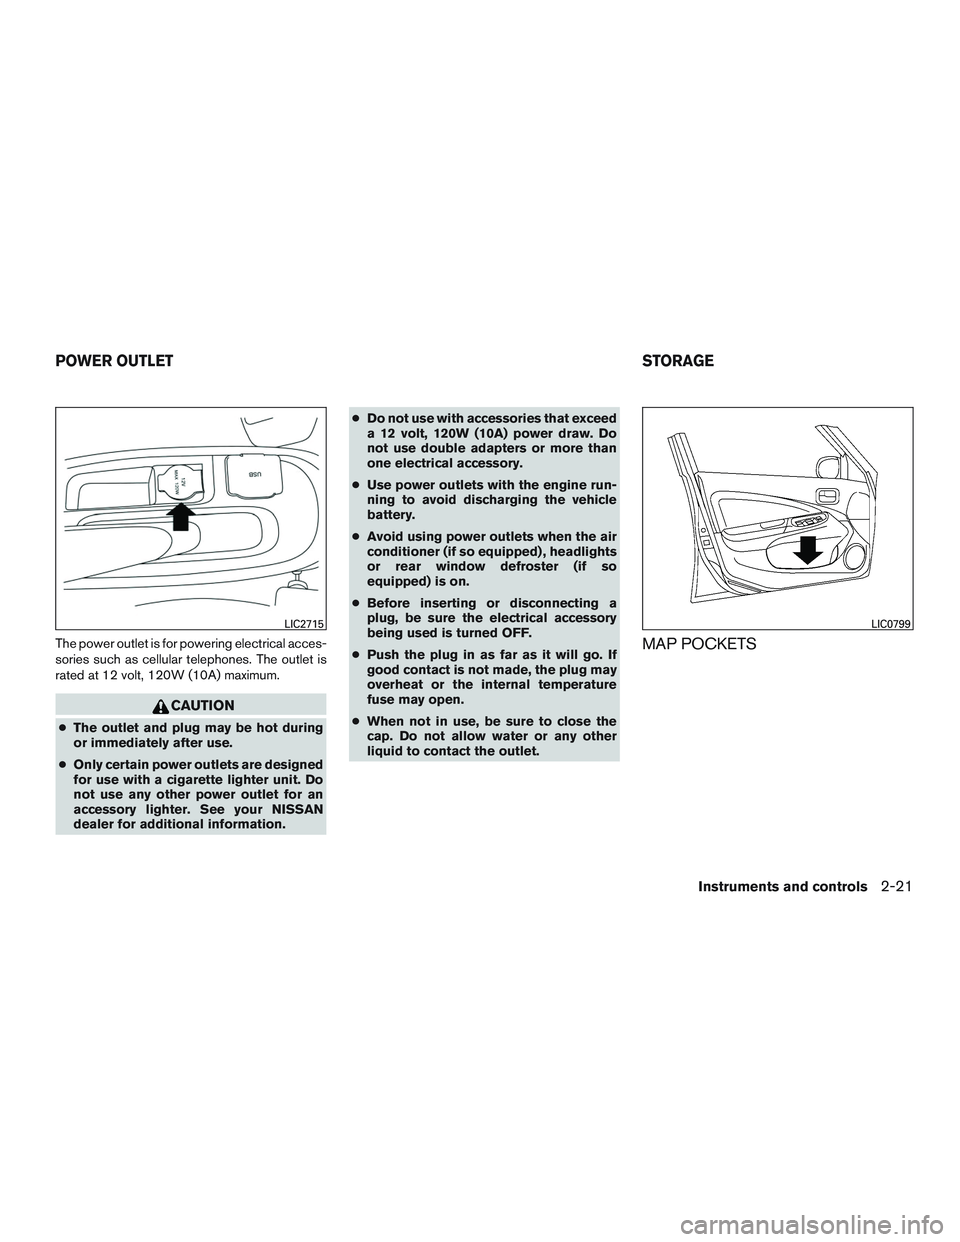 NISSAN MICRA 2012  Owners Manual The power outlet is for powering electrical acces-
sories such as cellular telephones. The outlet is
rated at 12 volt, 120W (10A) maximum. 